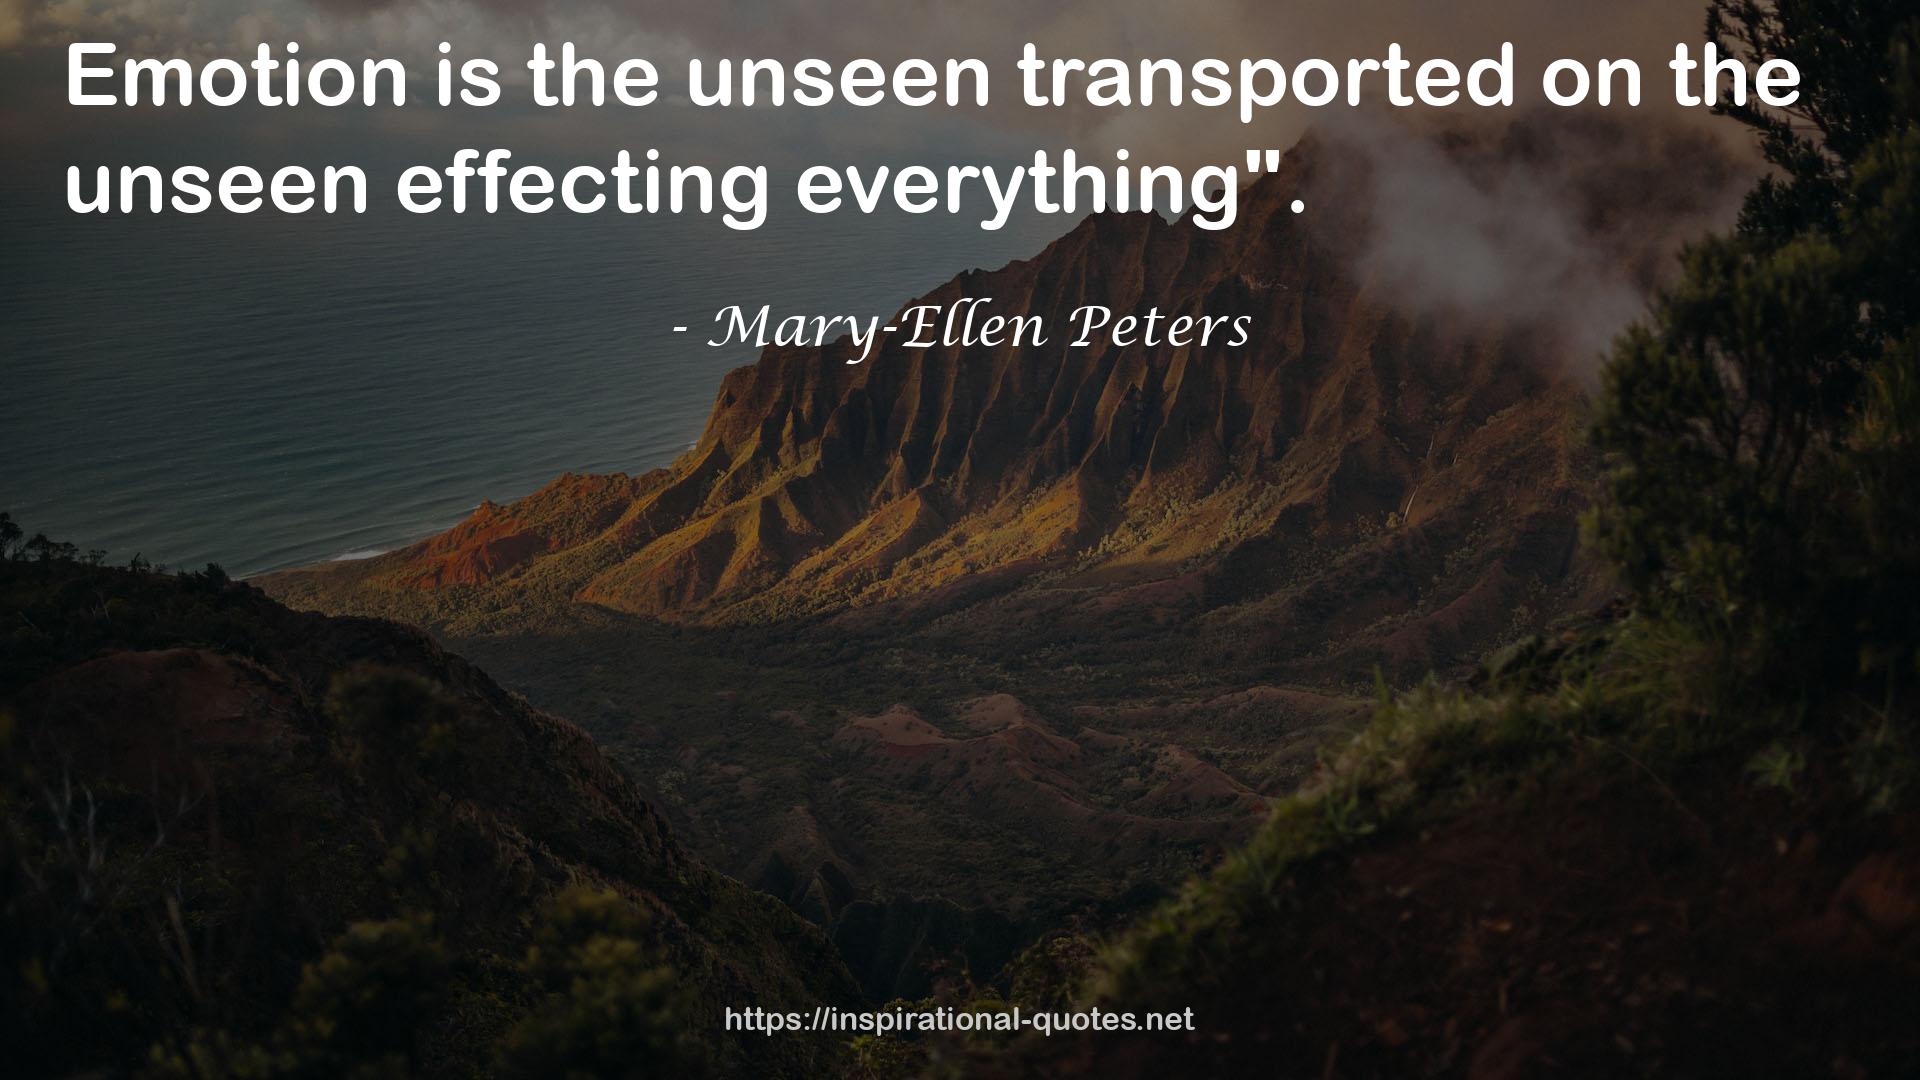 Mary-Ellen Peters QUOTES